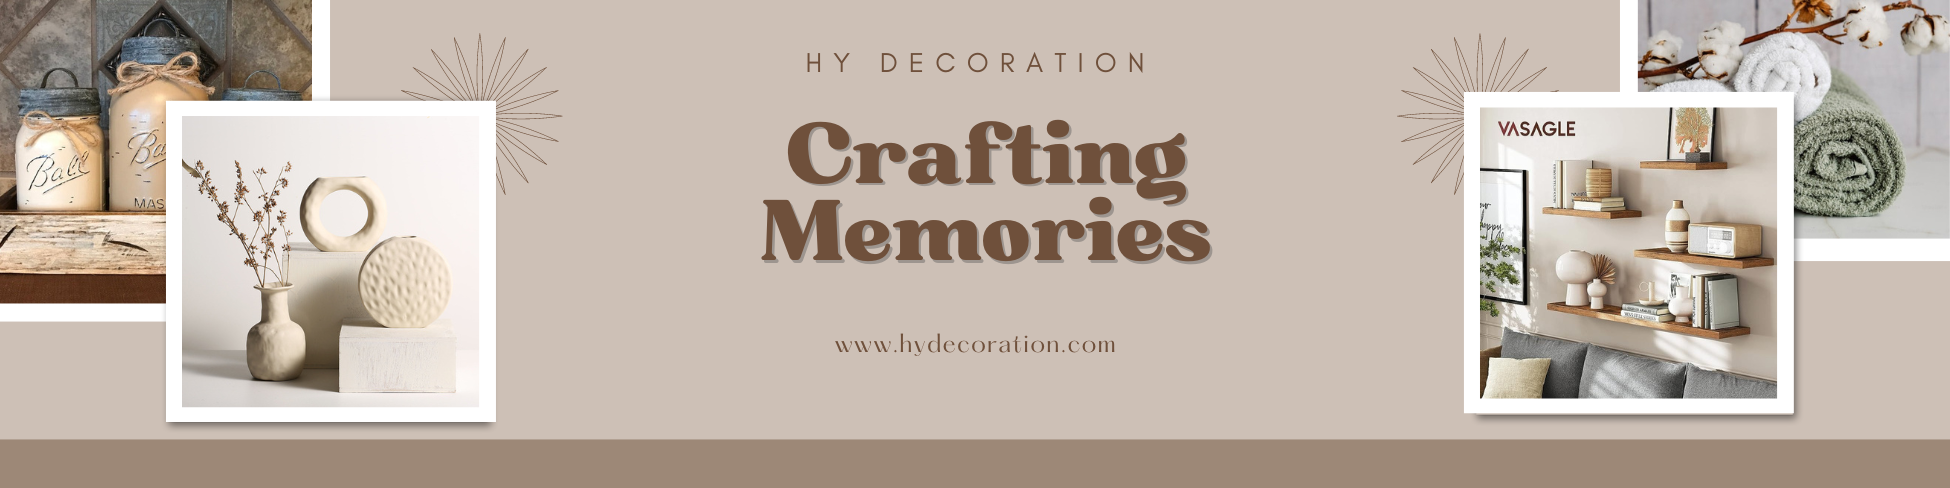 HY decoration general banner for pages